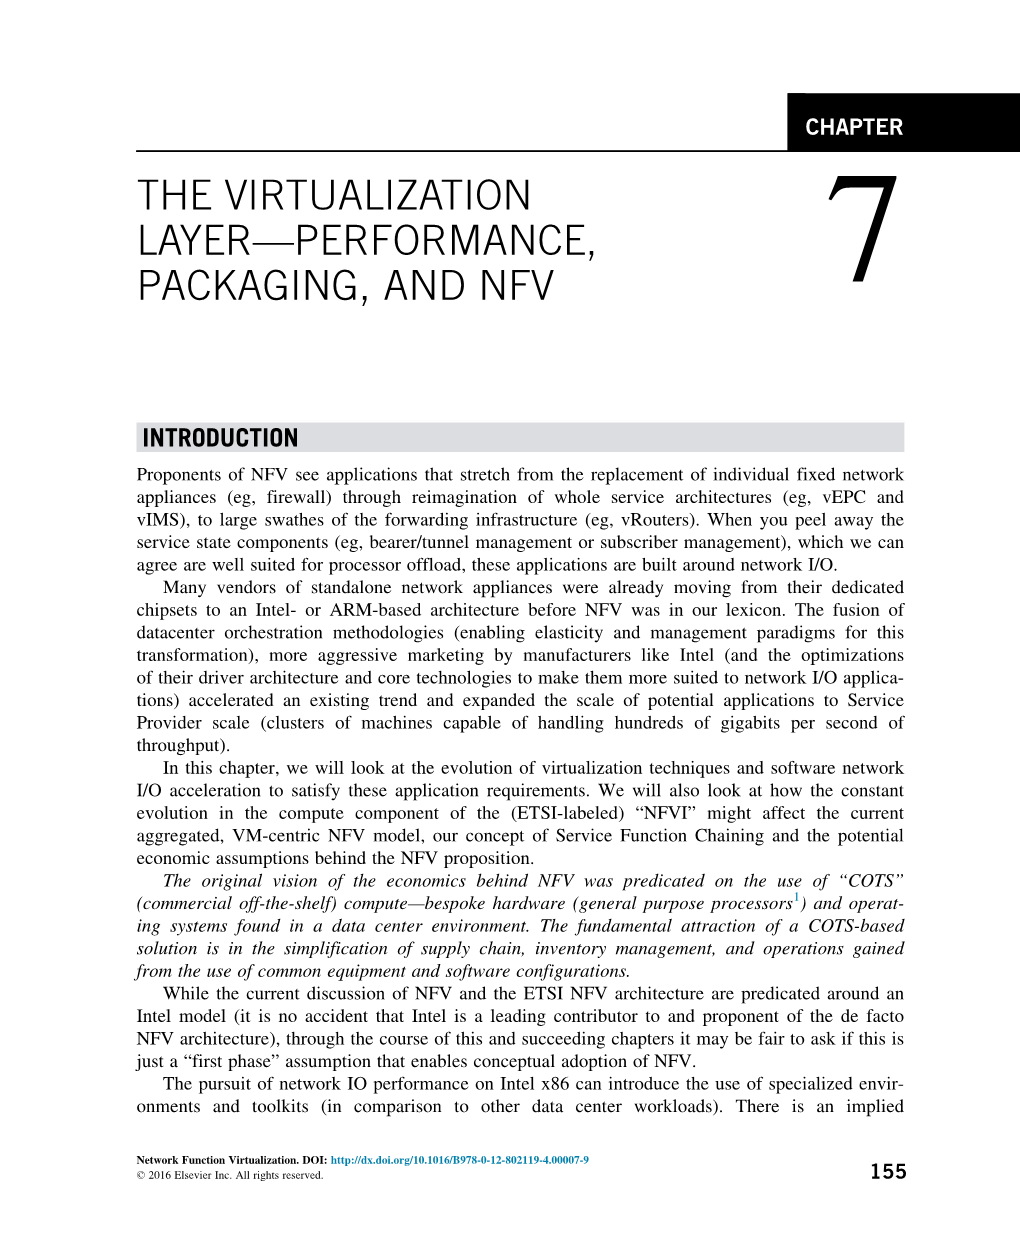 Chapter 7. the Virtualization Layer—Performance, Packaging, And